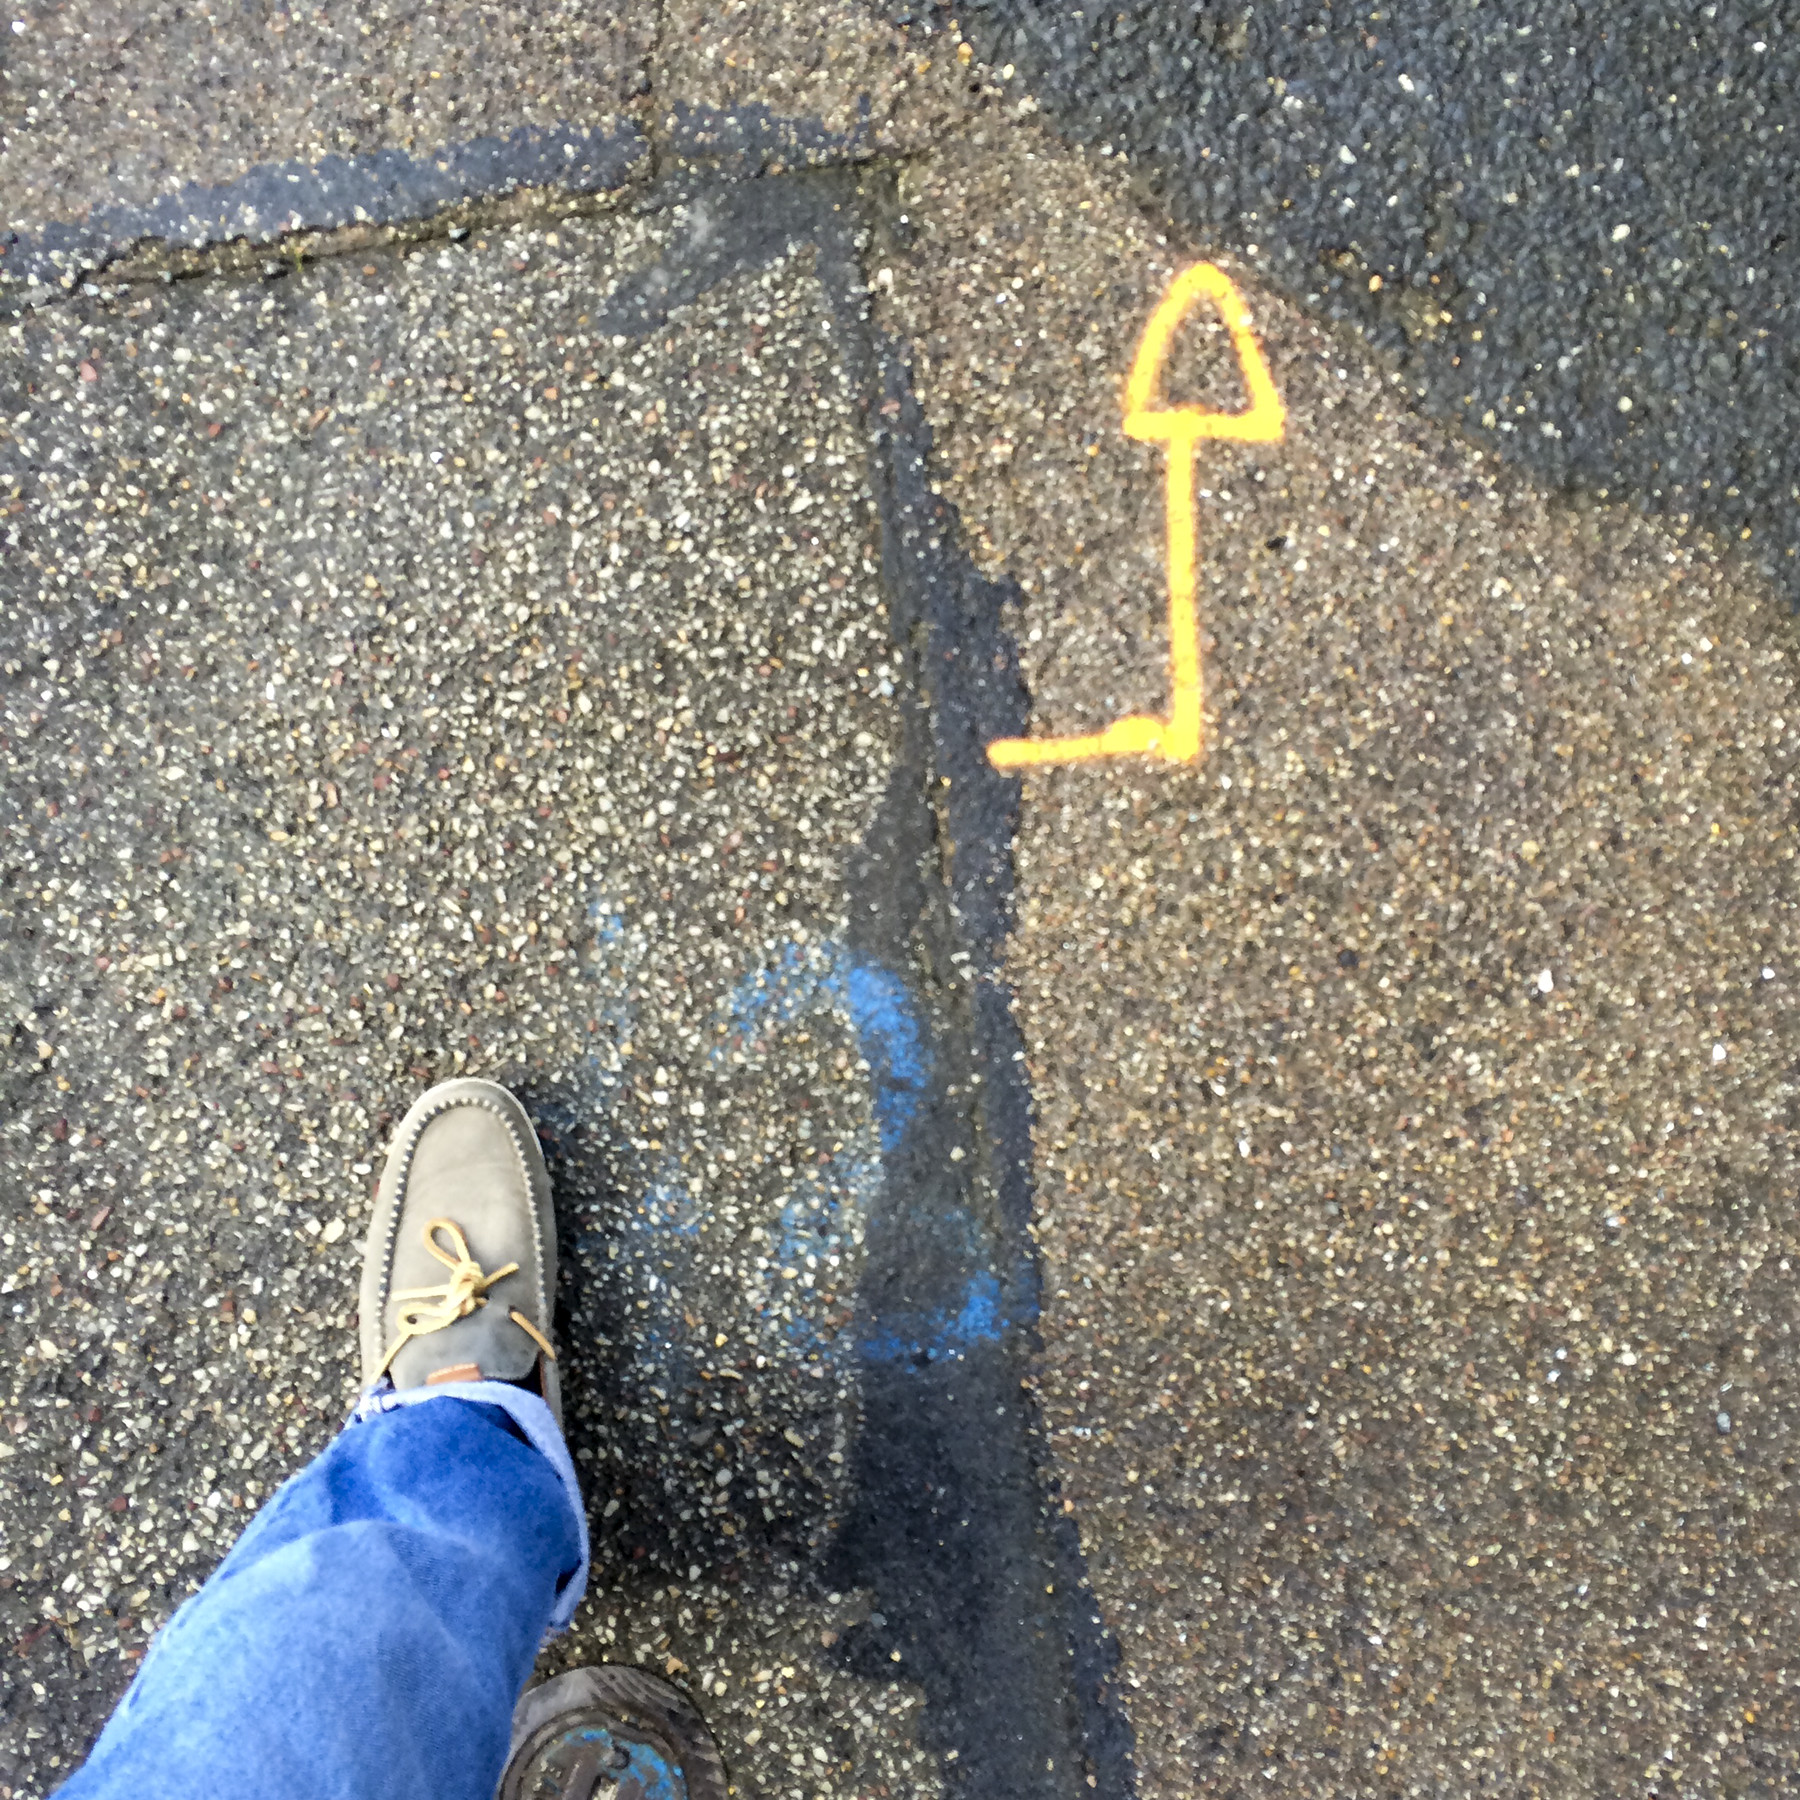 1st of 6 placeholder images: yellow arrow spraypainted on pavement, photograph's foot lower left